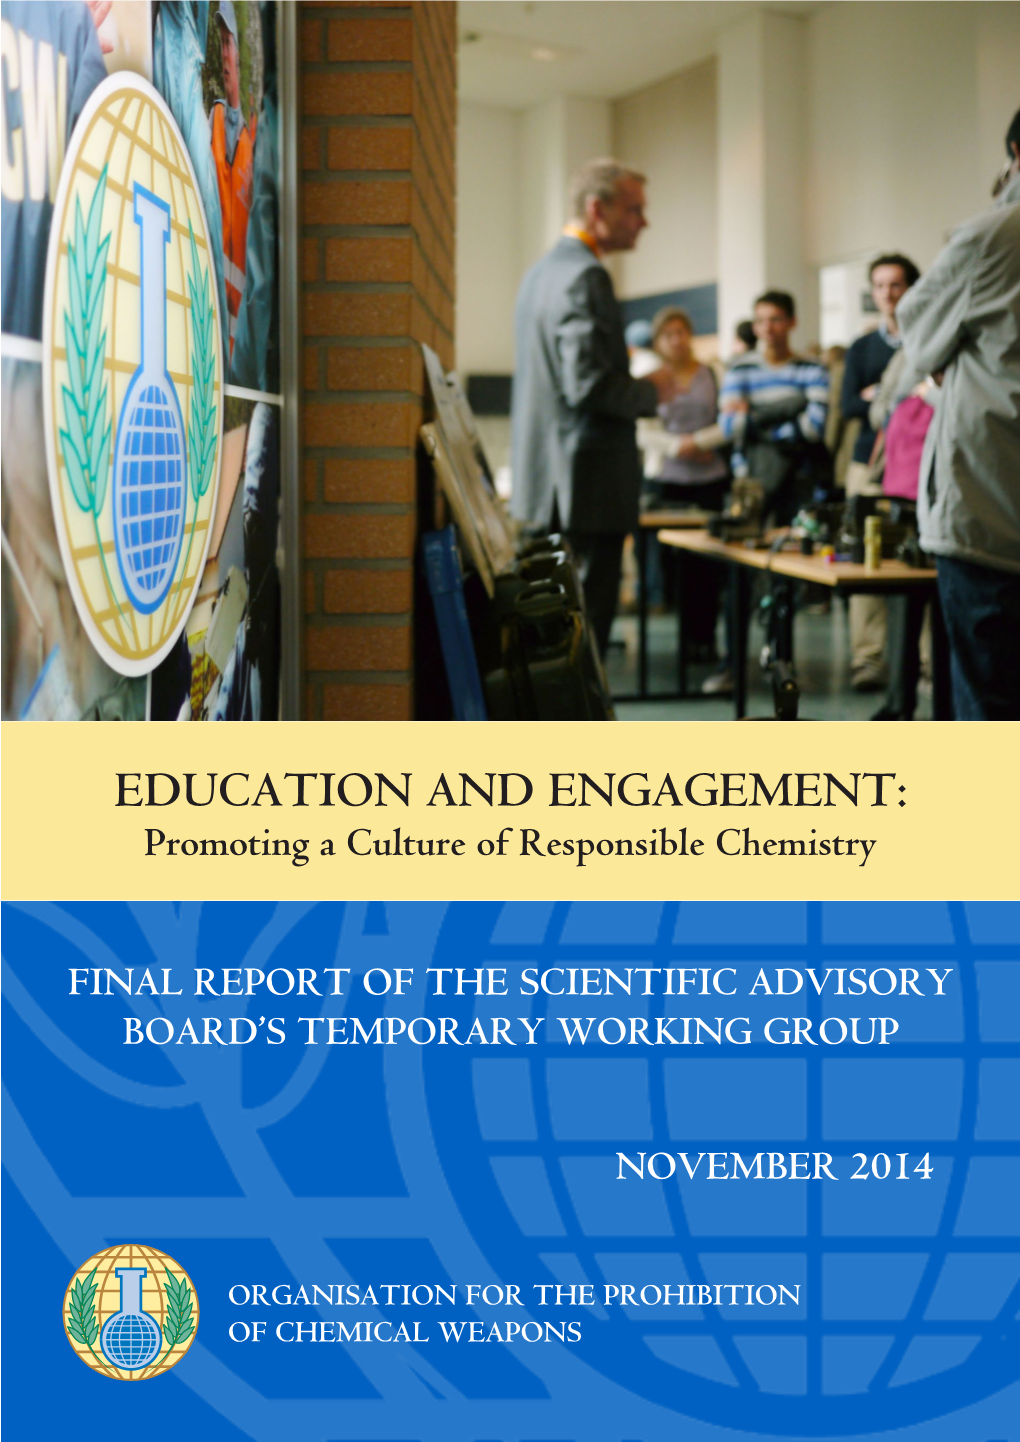 EDUCATION and ENGAGEMENT: Promoting a Culture of Responsible Chemistry